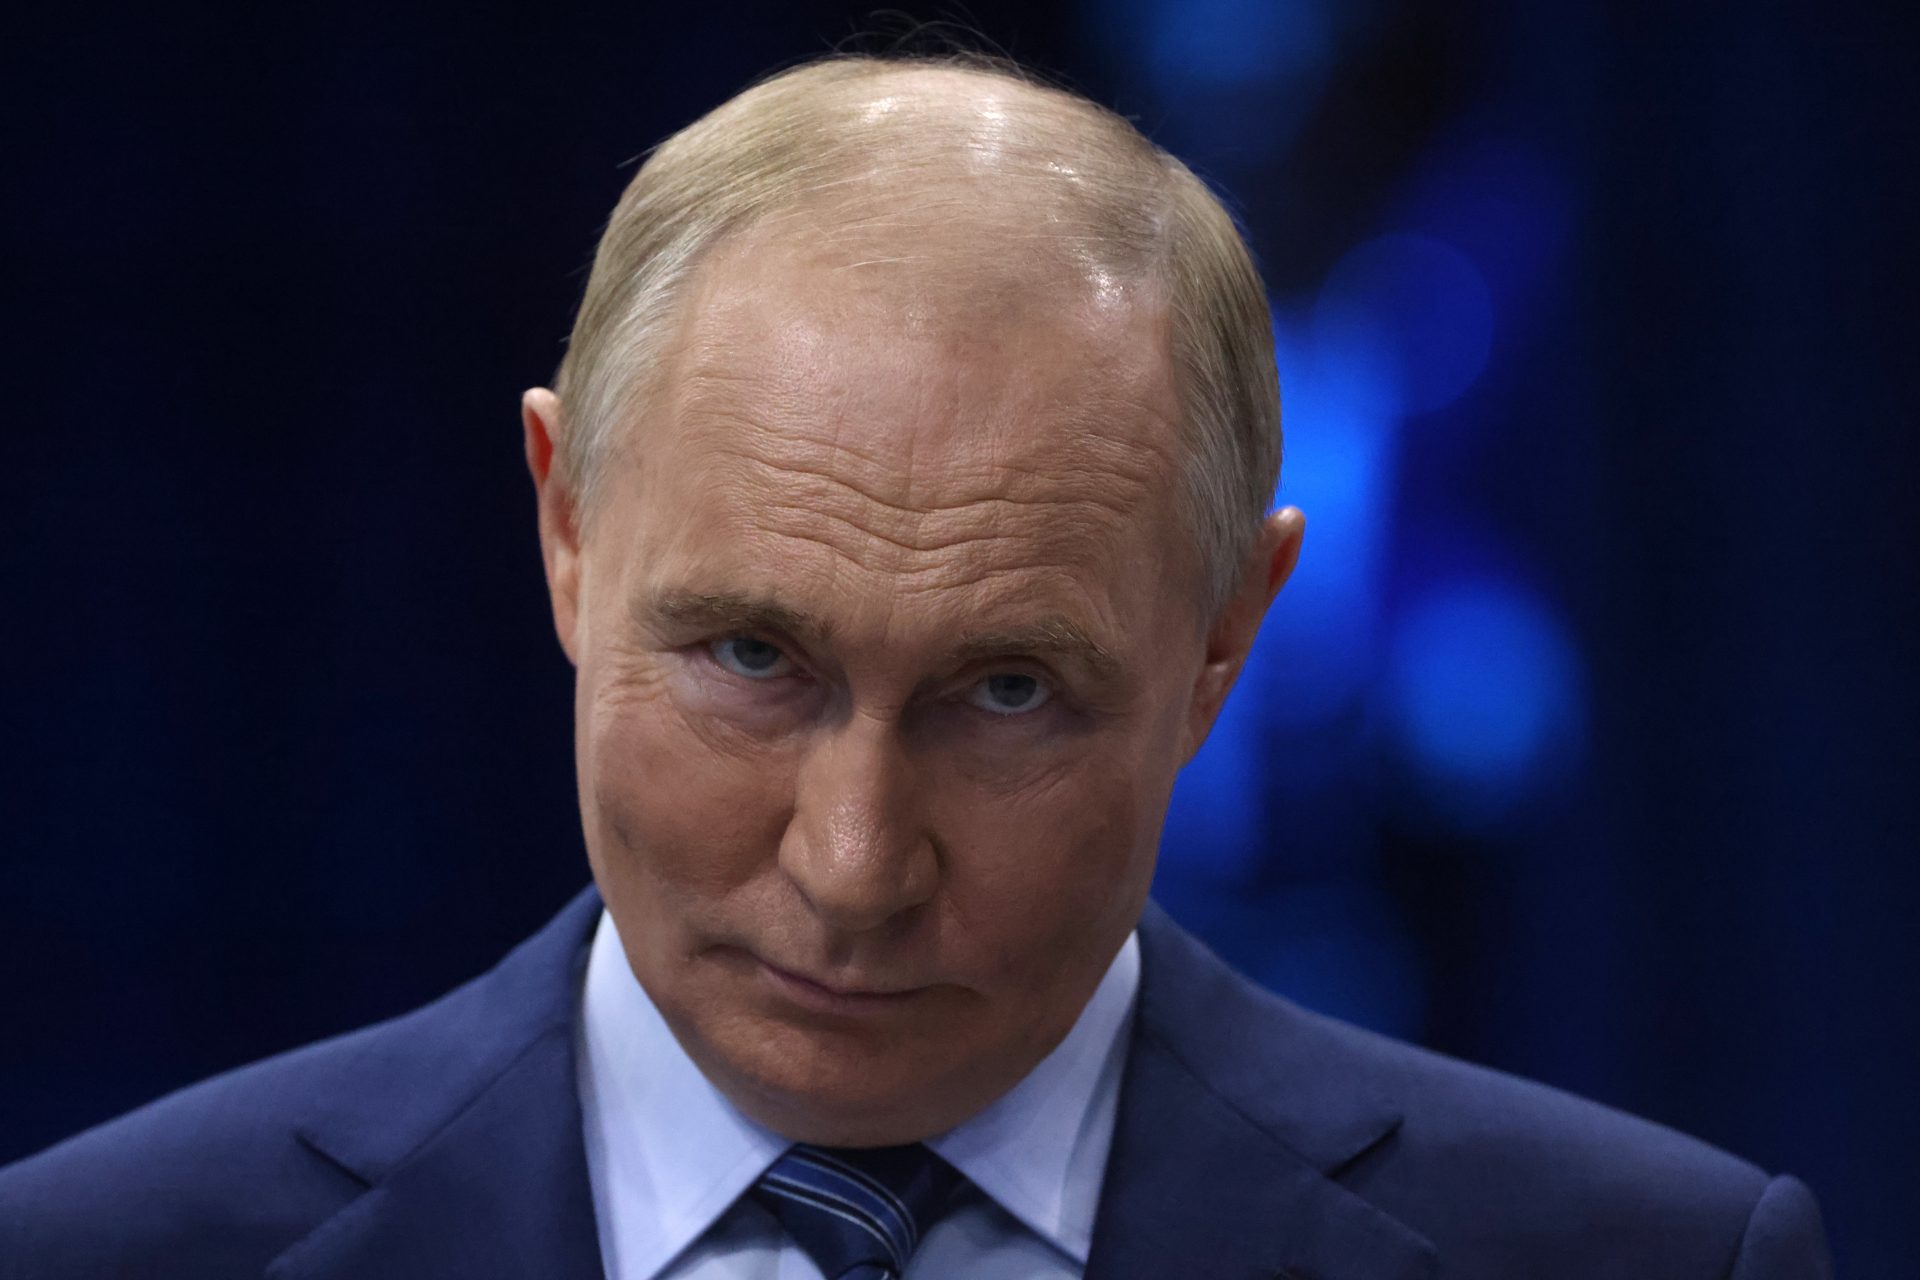 Putin issues new threat over planned nuclear deployments